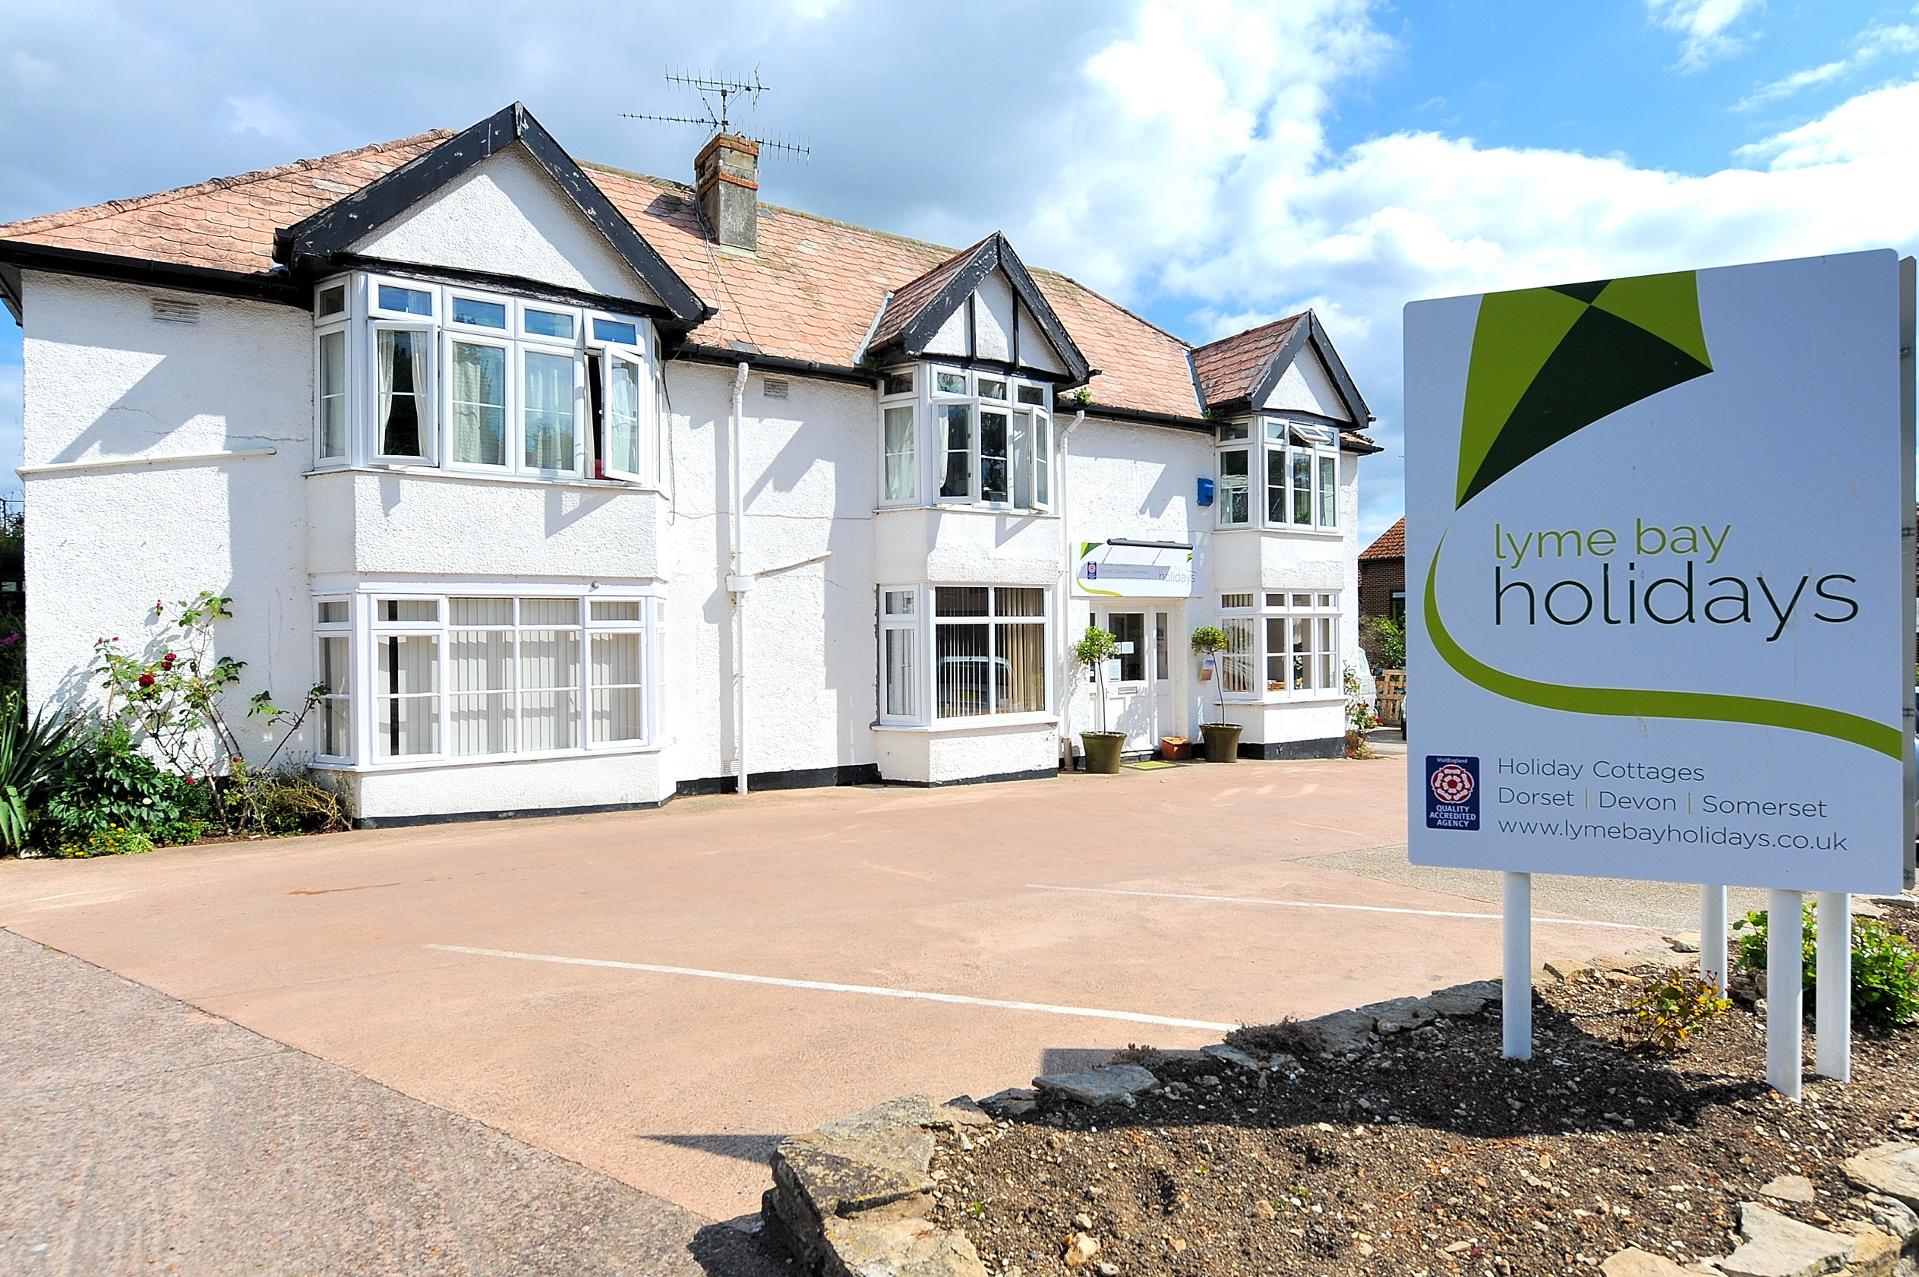 Sykes Holiday Cottages continues expansion with double acquisition